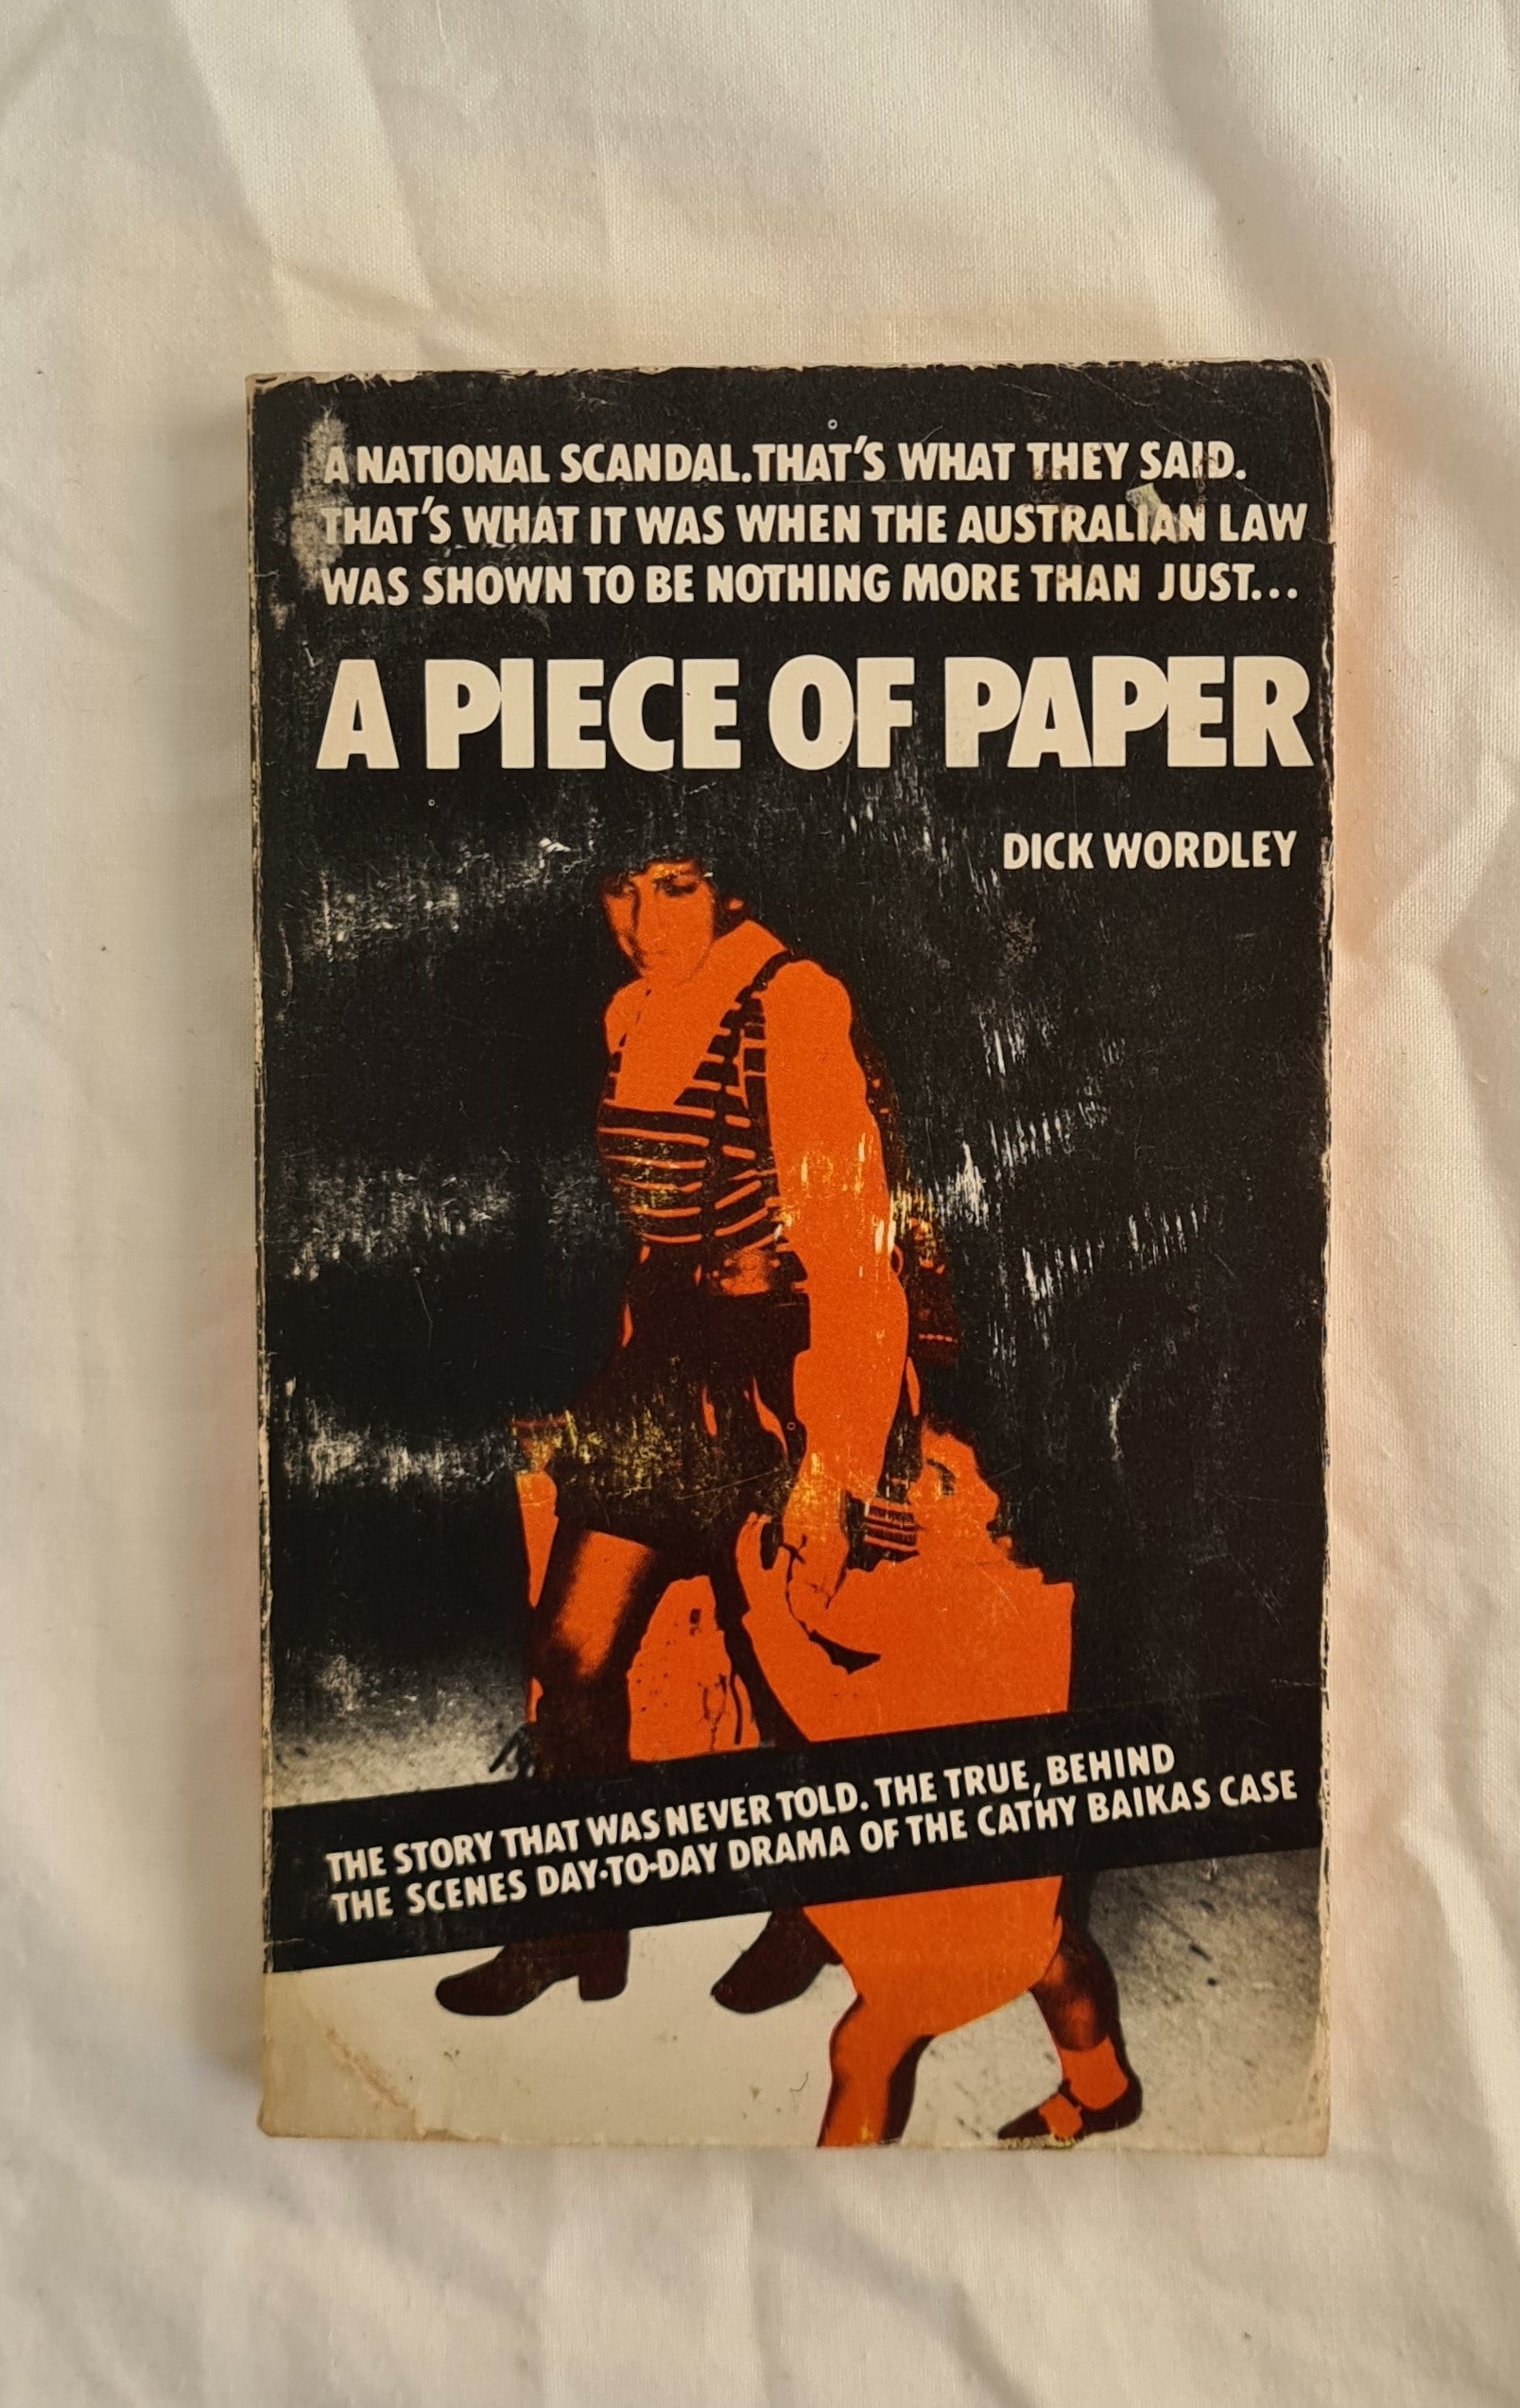 A Piece of Paper by Dick Wordley